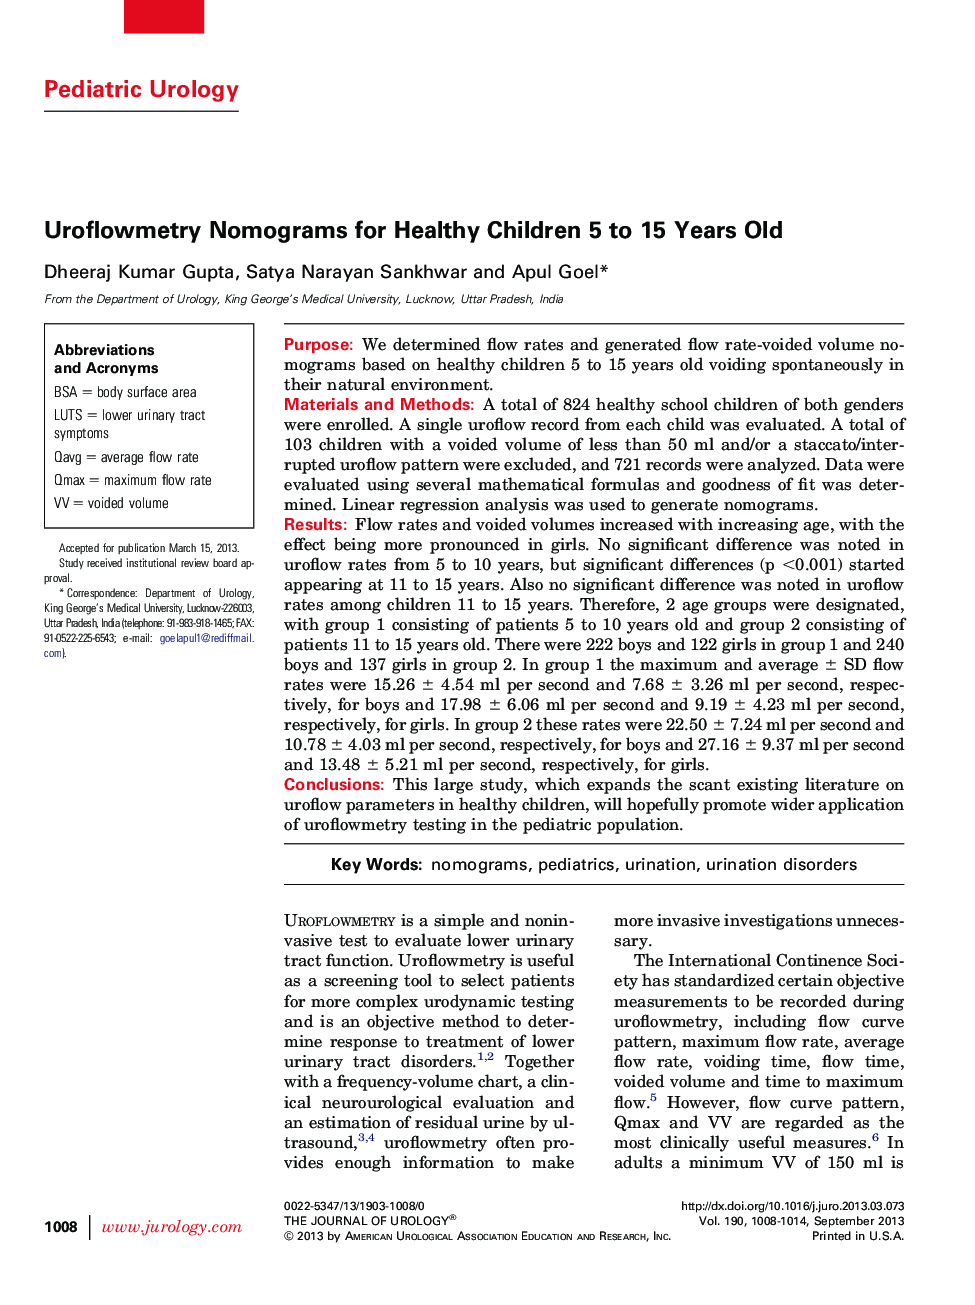 Uroflowmetry Nomograms for Healthy Children 5 to 15 Years Old 